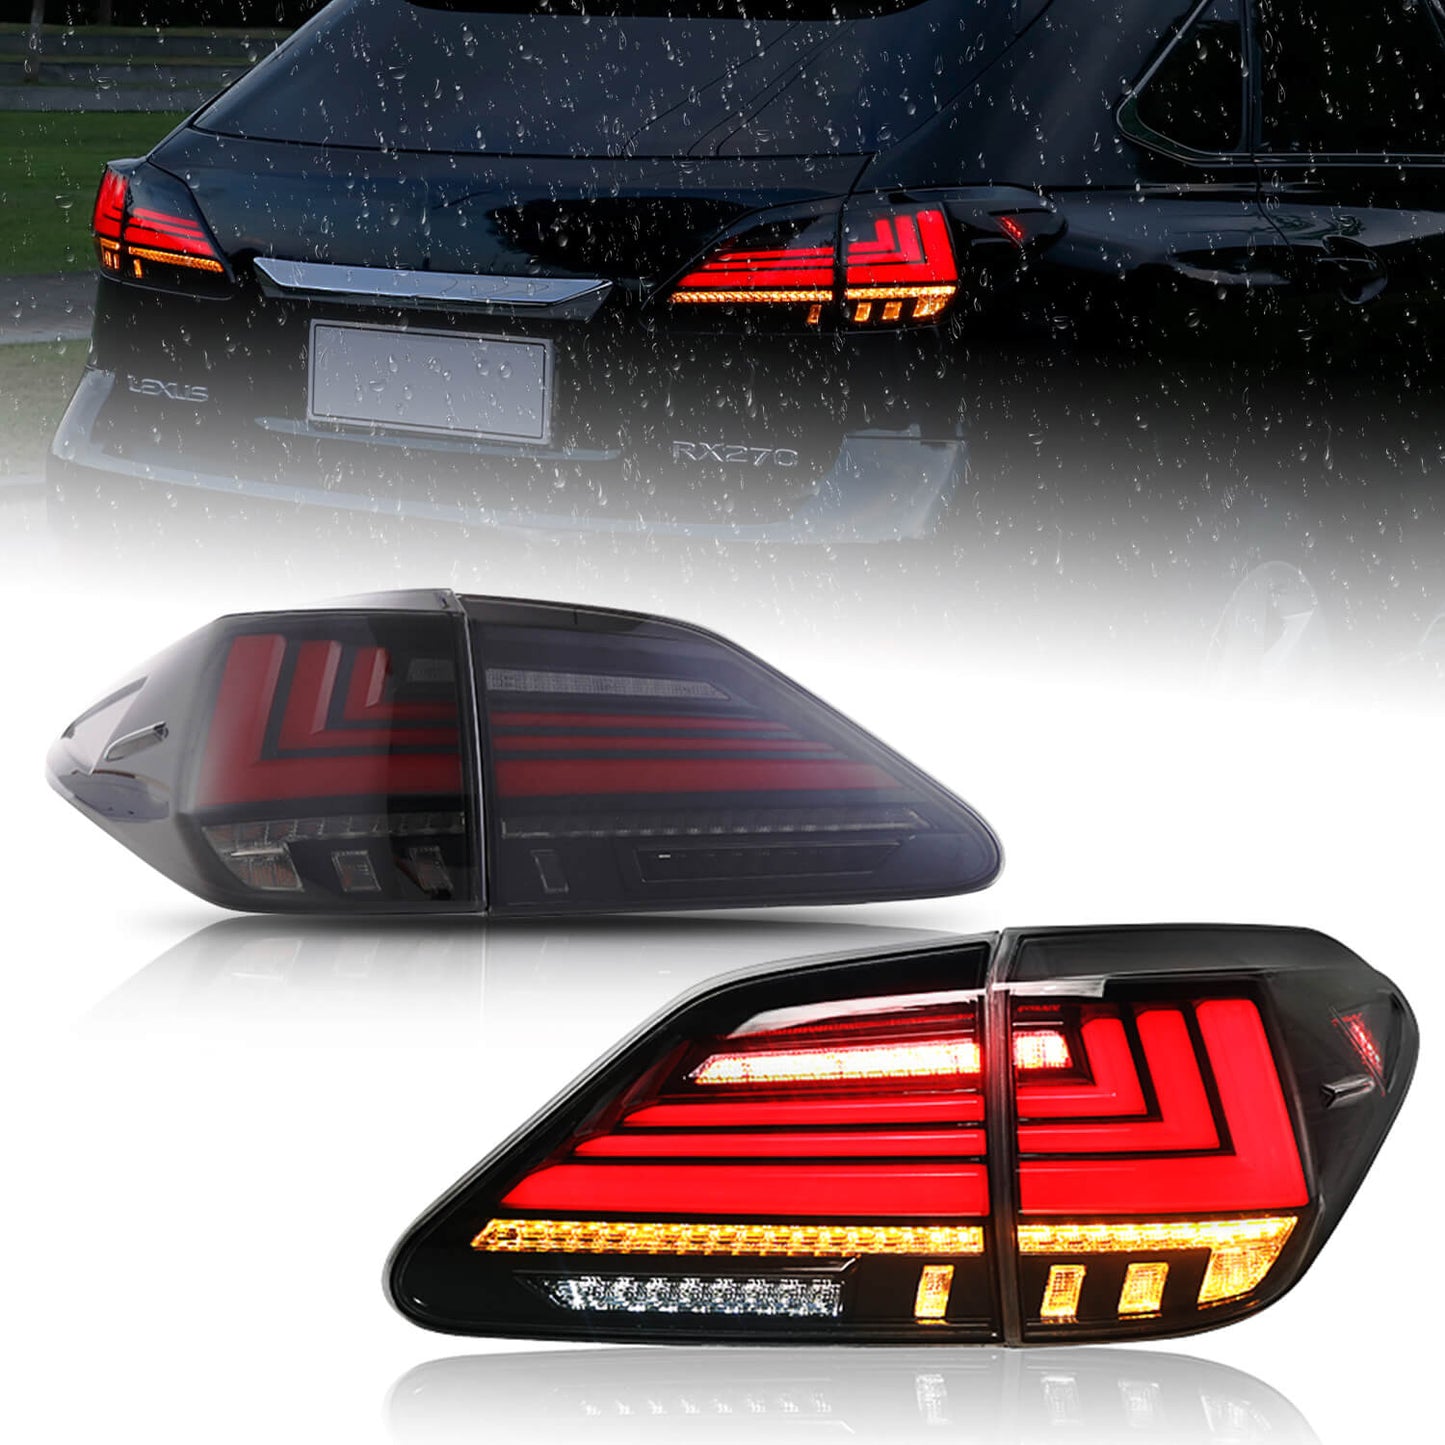 HCMOTION LED Tail Lights for Lexus RX350 RX450 RX270 2009-2015